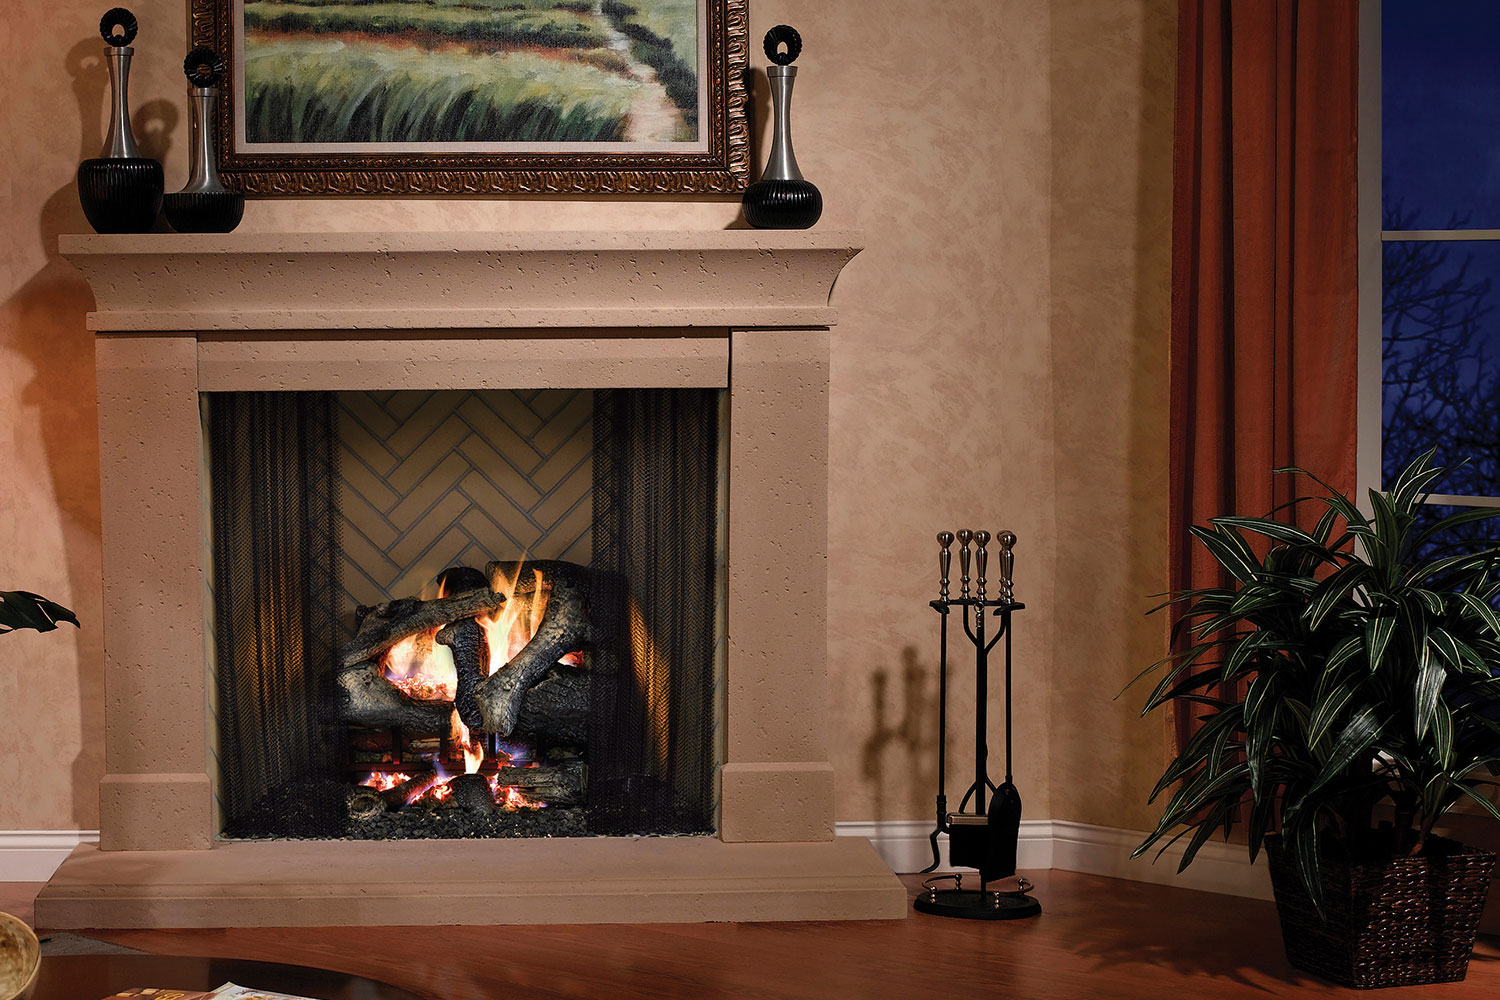 Wood fireplace burning in smooth tan insert with herringbone tile interior, in a living room.